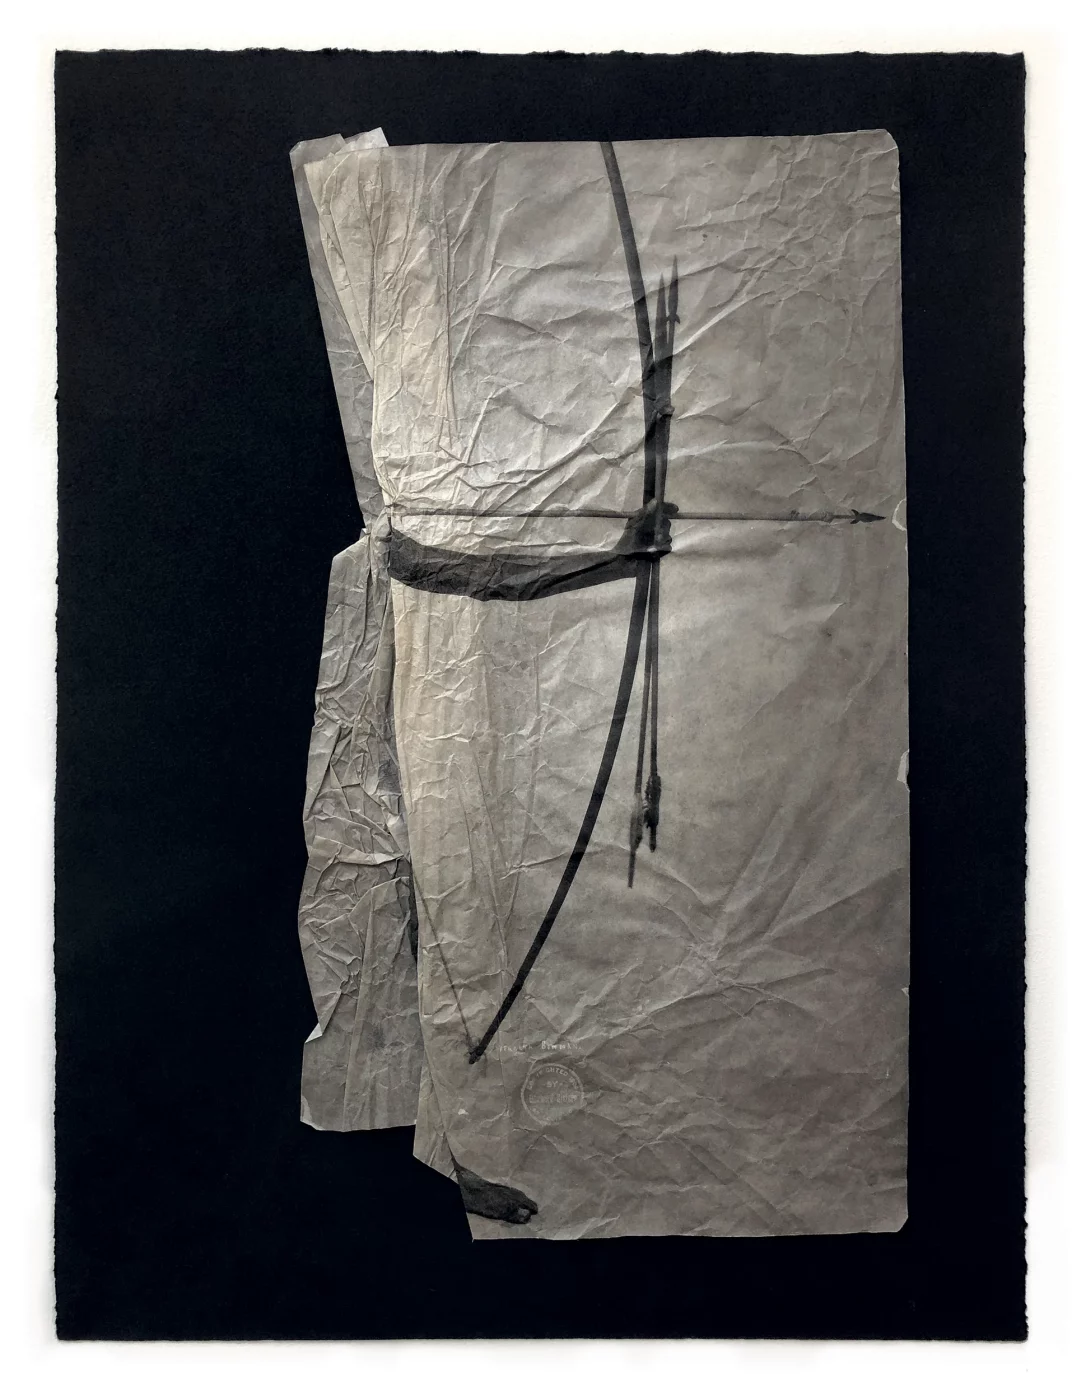 Stephanie Syjuco. <em>Deflection of Vision</em>, from <em>Afterimages</em> series, 2021. Courtesy of the artist, Catharine Clark Gallery, San Francisco, and Mullowney Printing, Portland.